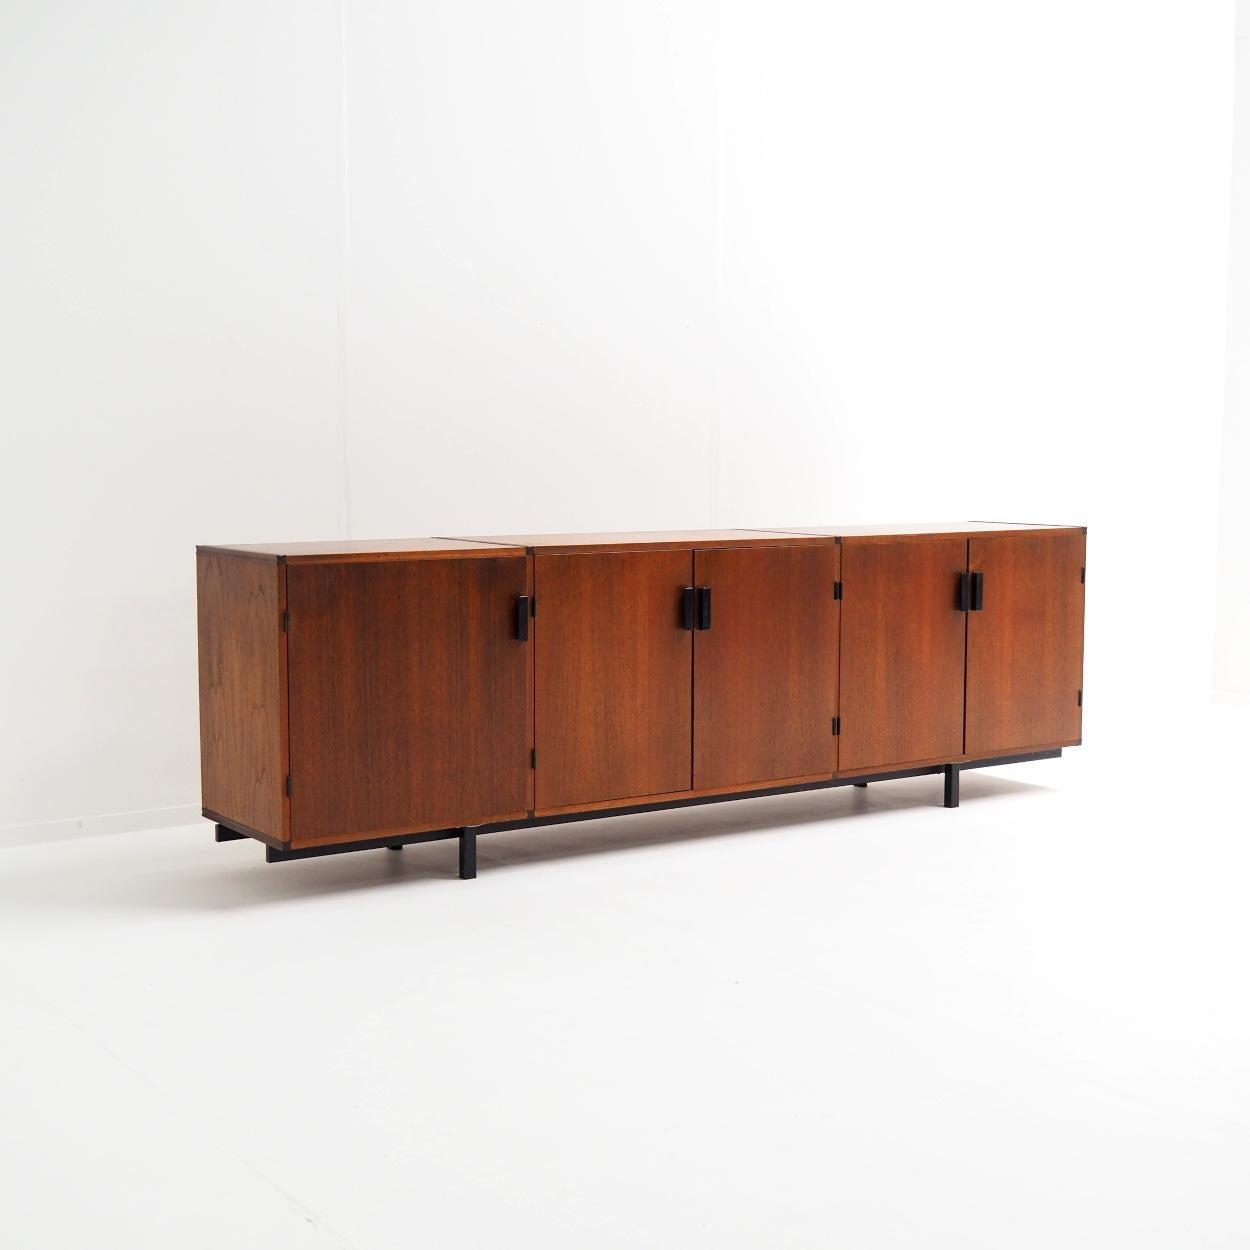 Sideboard by Cees Braakman for Pastoe. It’s the ‘Made to Measure’ series that was produced from the early 1950s till the mid 1960s.

The sideboard is in very good condition with some wear and tear on top, corresponding with age and use. See the